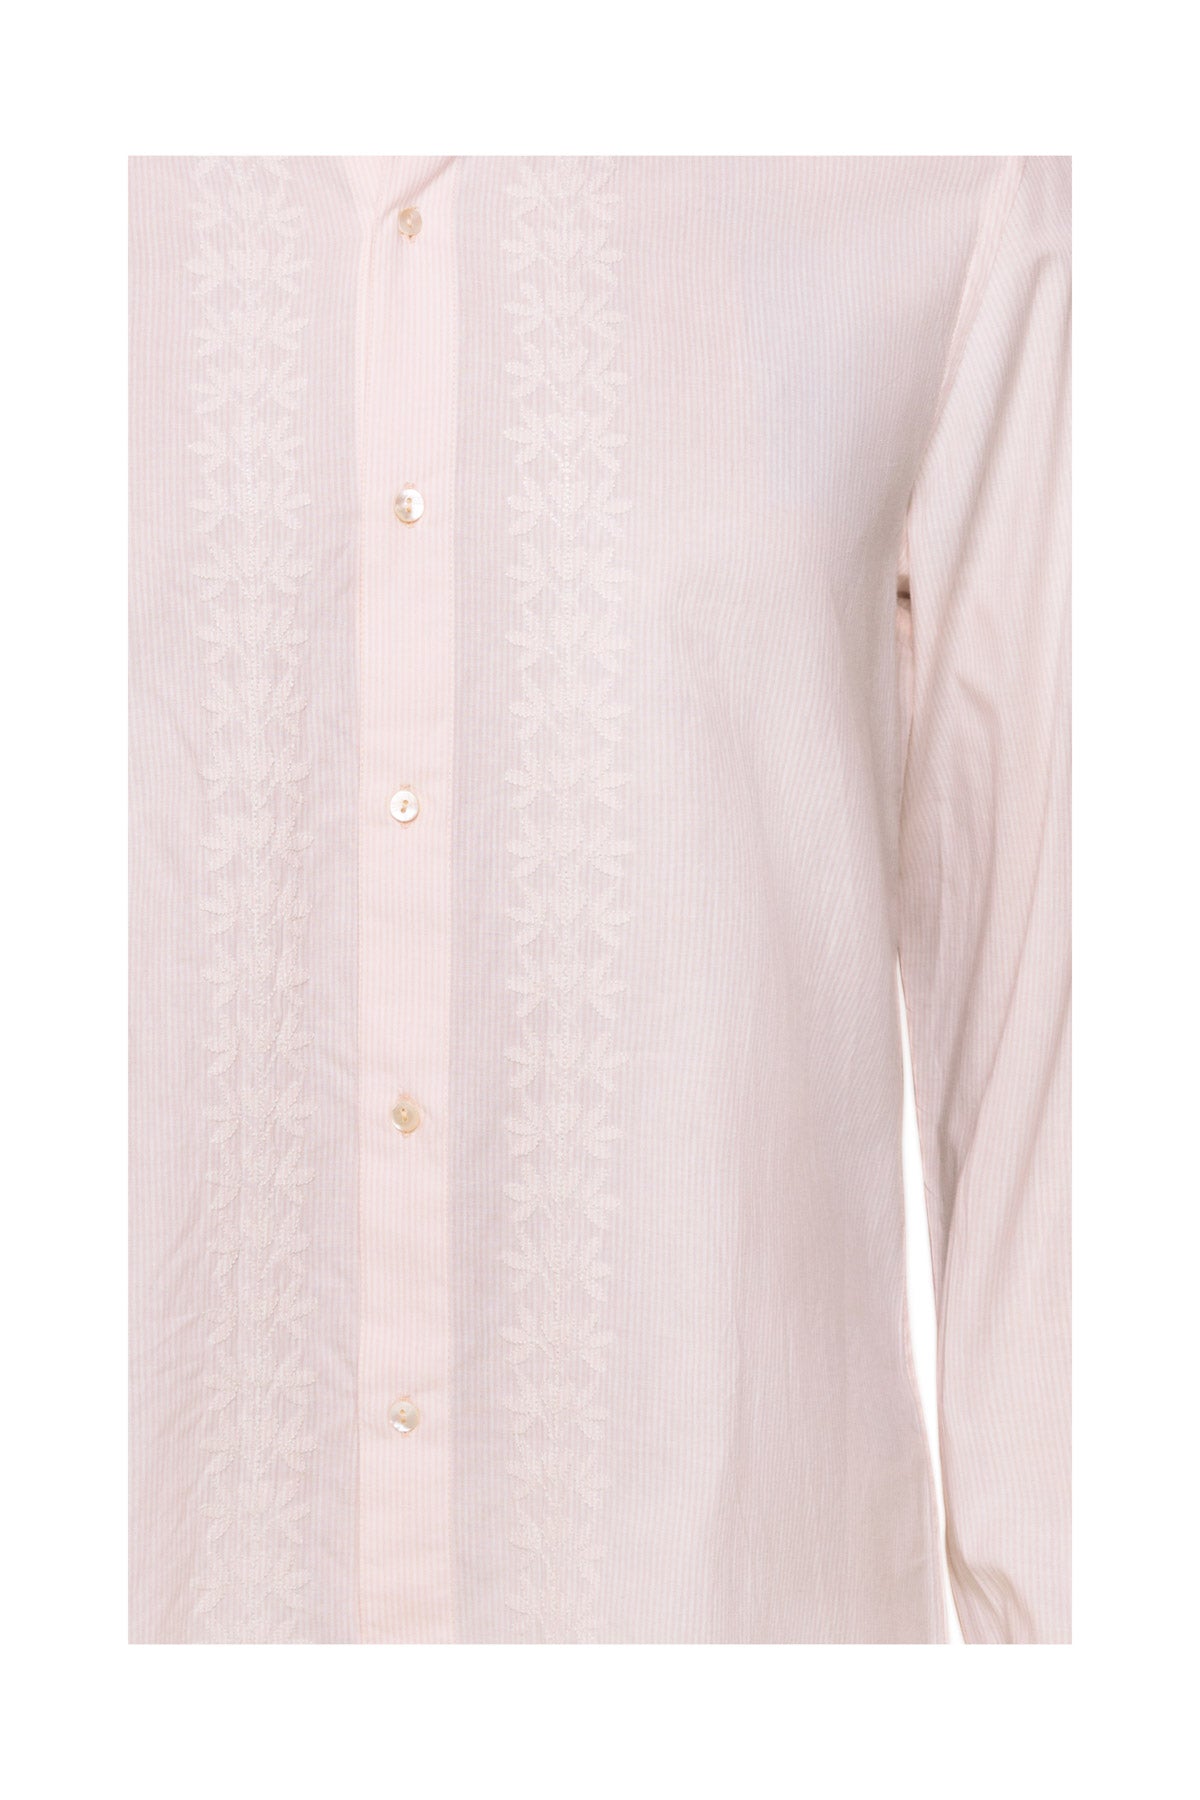 Men's Cotton Embroidered Shirt - Pale Pink